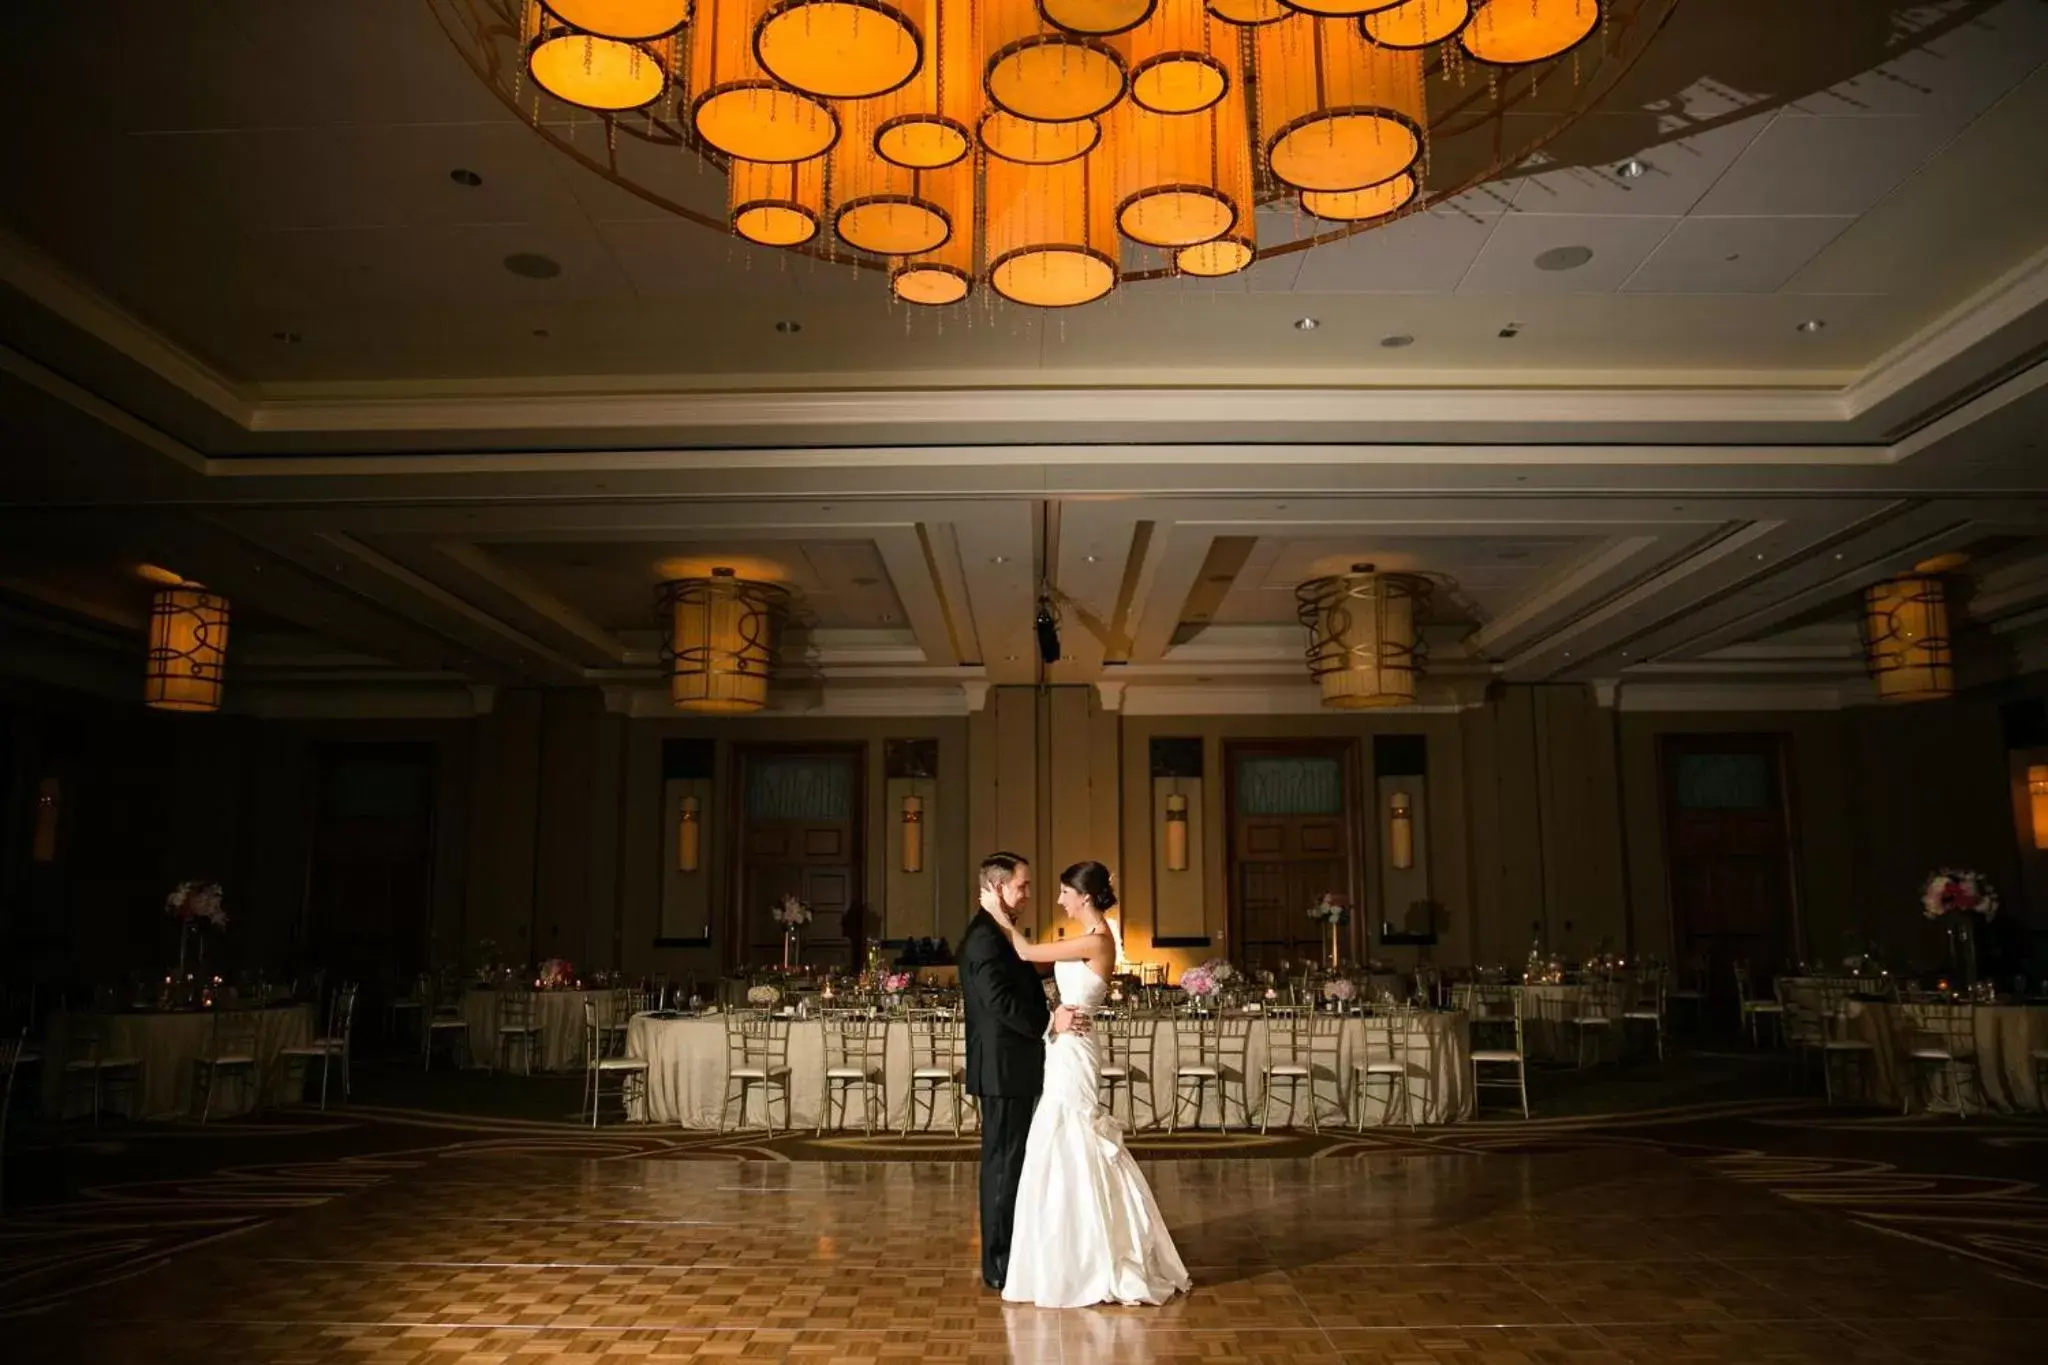 Banquet/Function facilities, Banquet Facilities in Omni Fort Worth Hotel